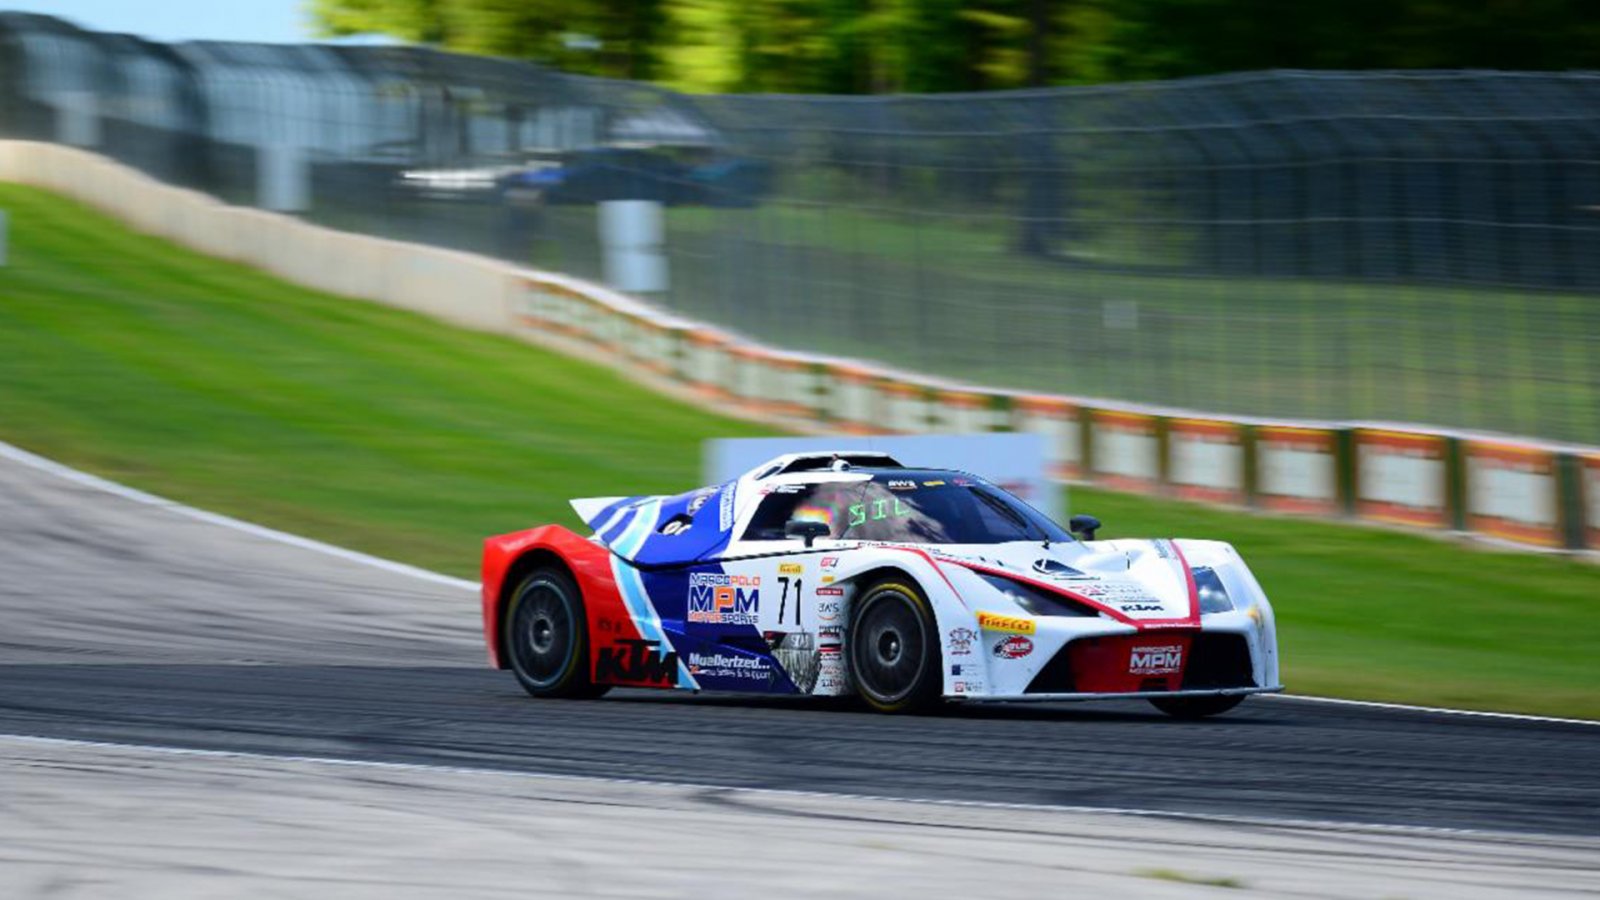 Marco Polo Motorsports Dominates in KTM X-Bow at Road America